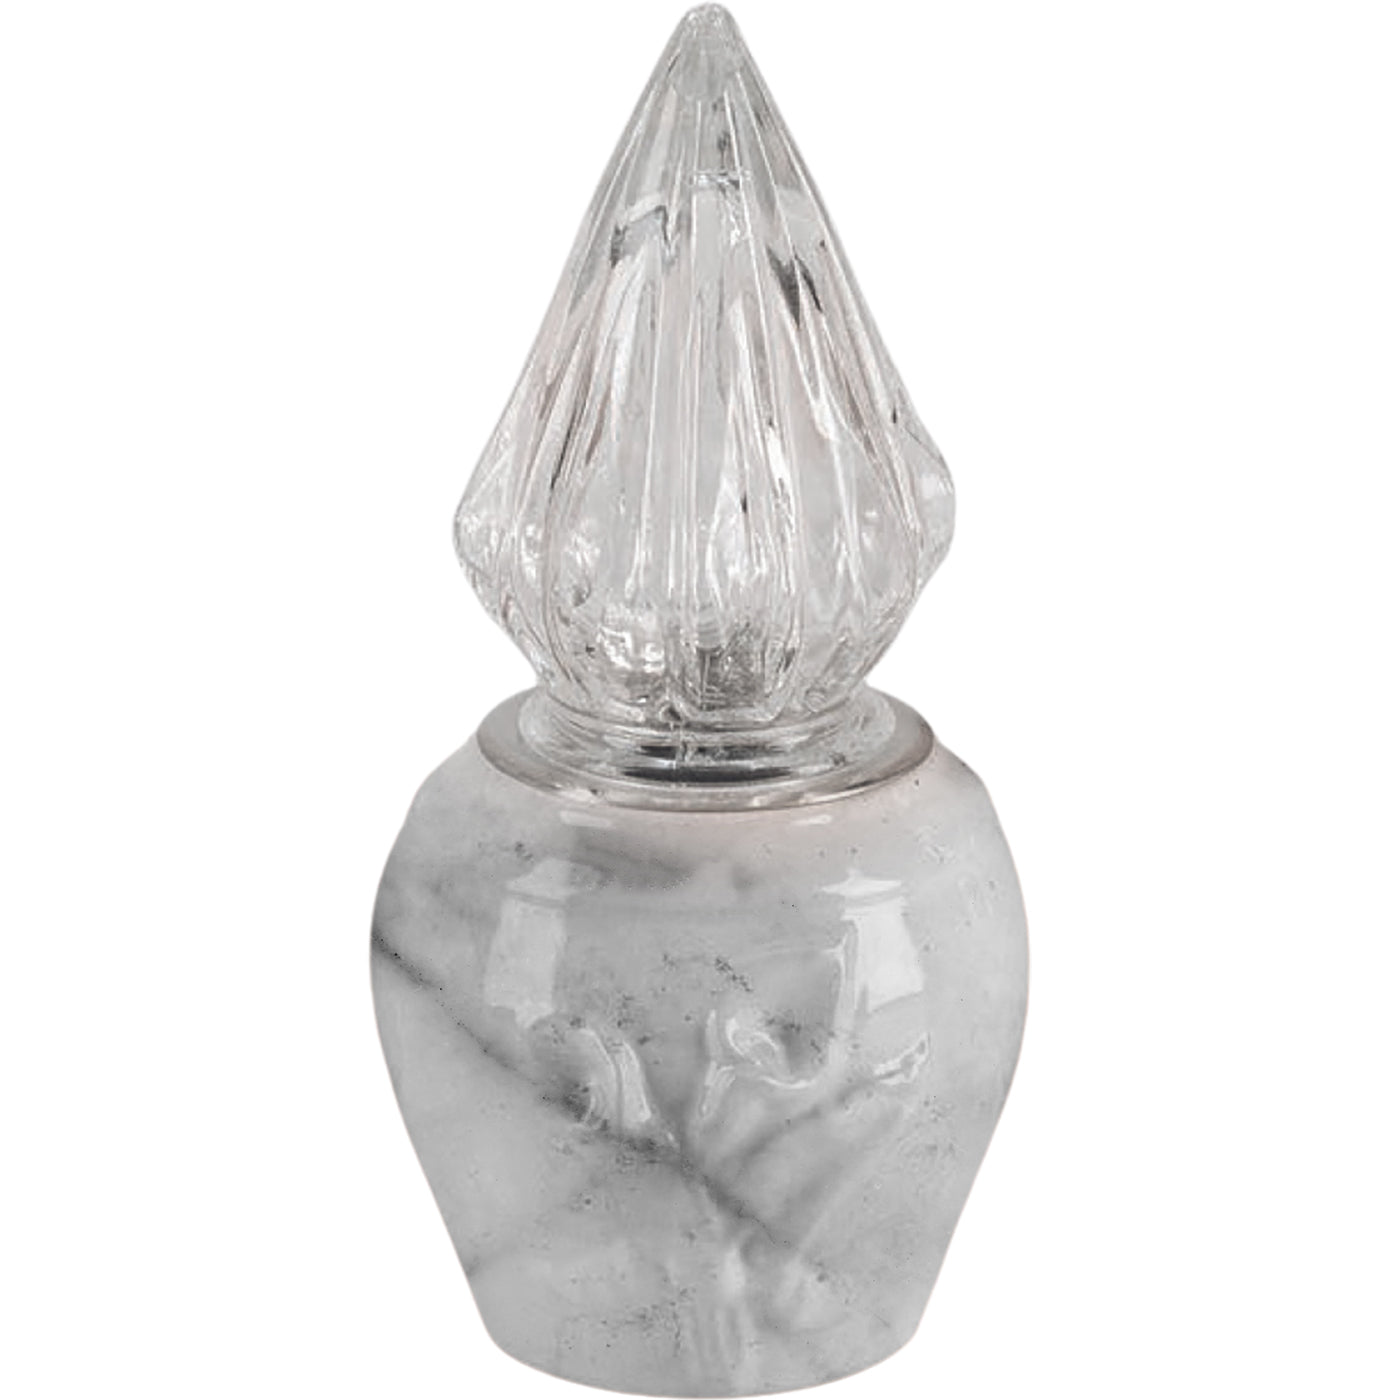 Grave light Calla carrara 10x10cm - 3.9x3.9in In white porcelain with carrara decoration, ground attached CAL164T/CARR